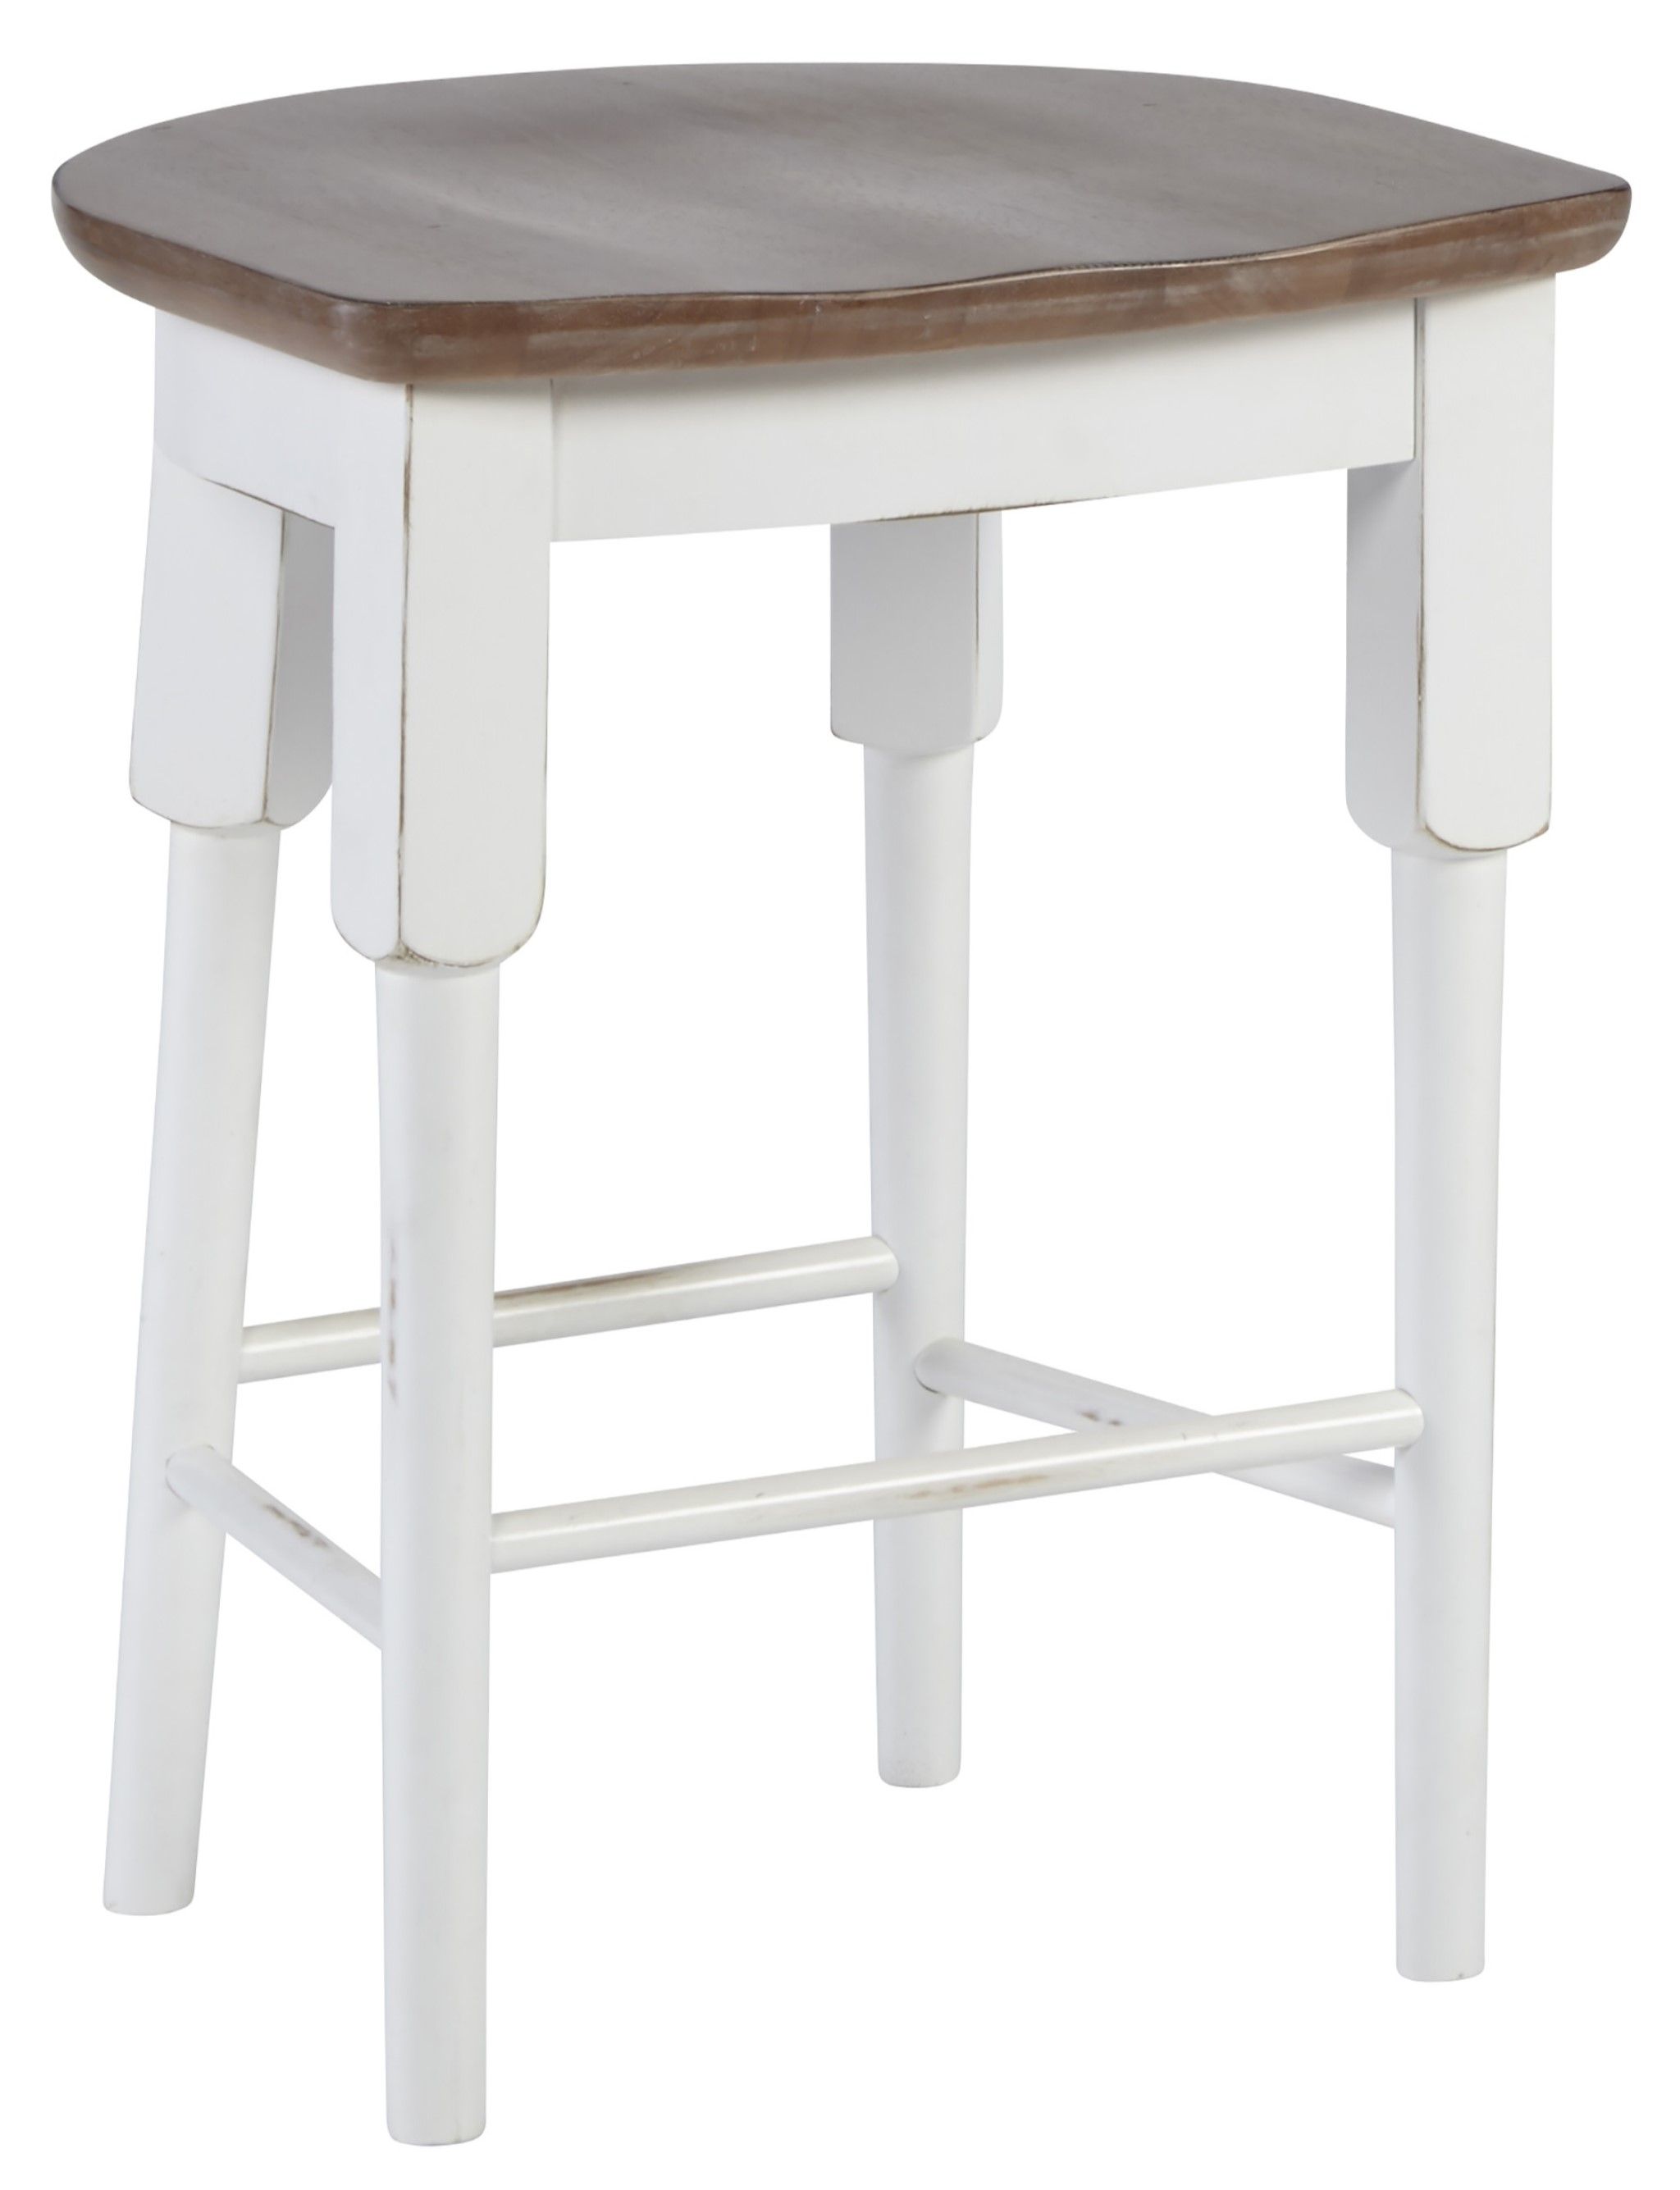 D884-64 Dining Room Counter Stool - Light Oak And Distressed White